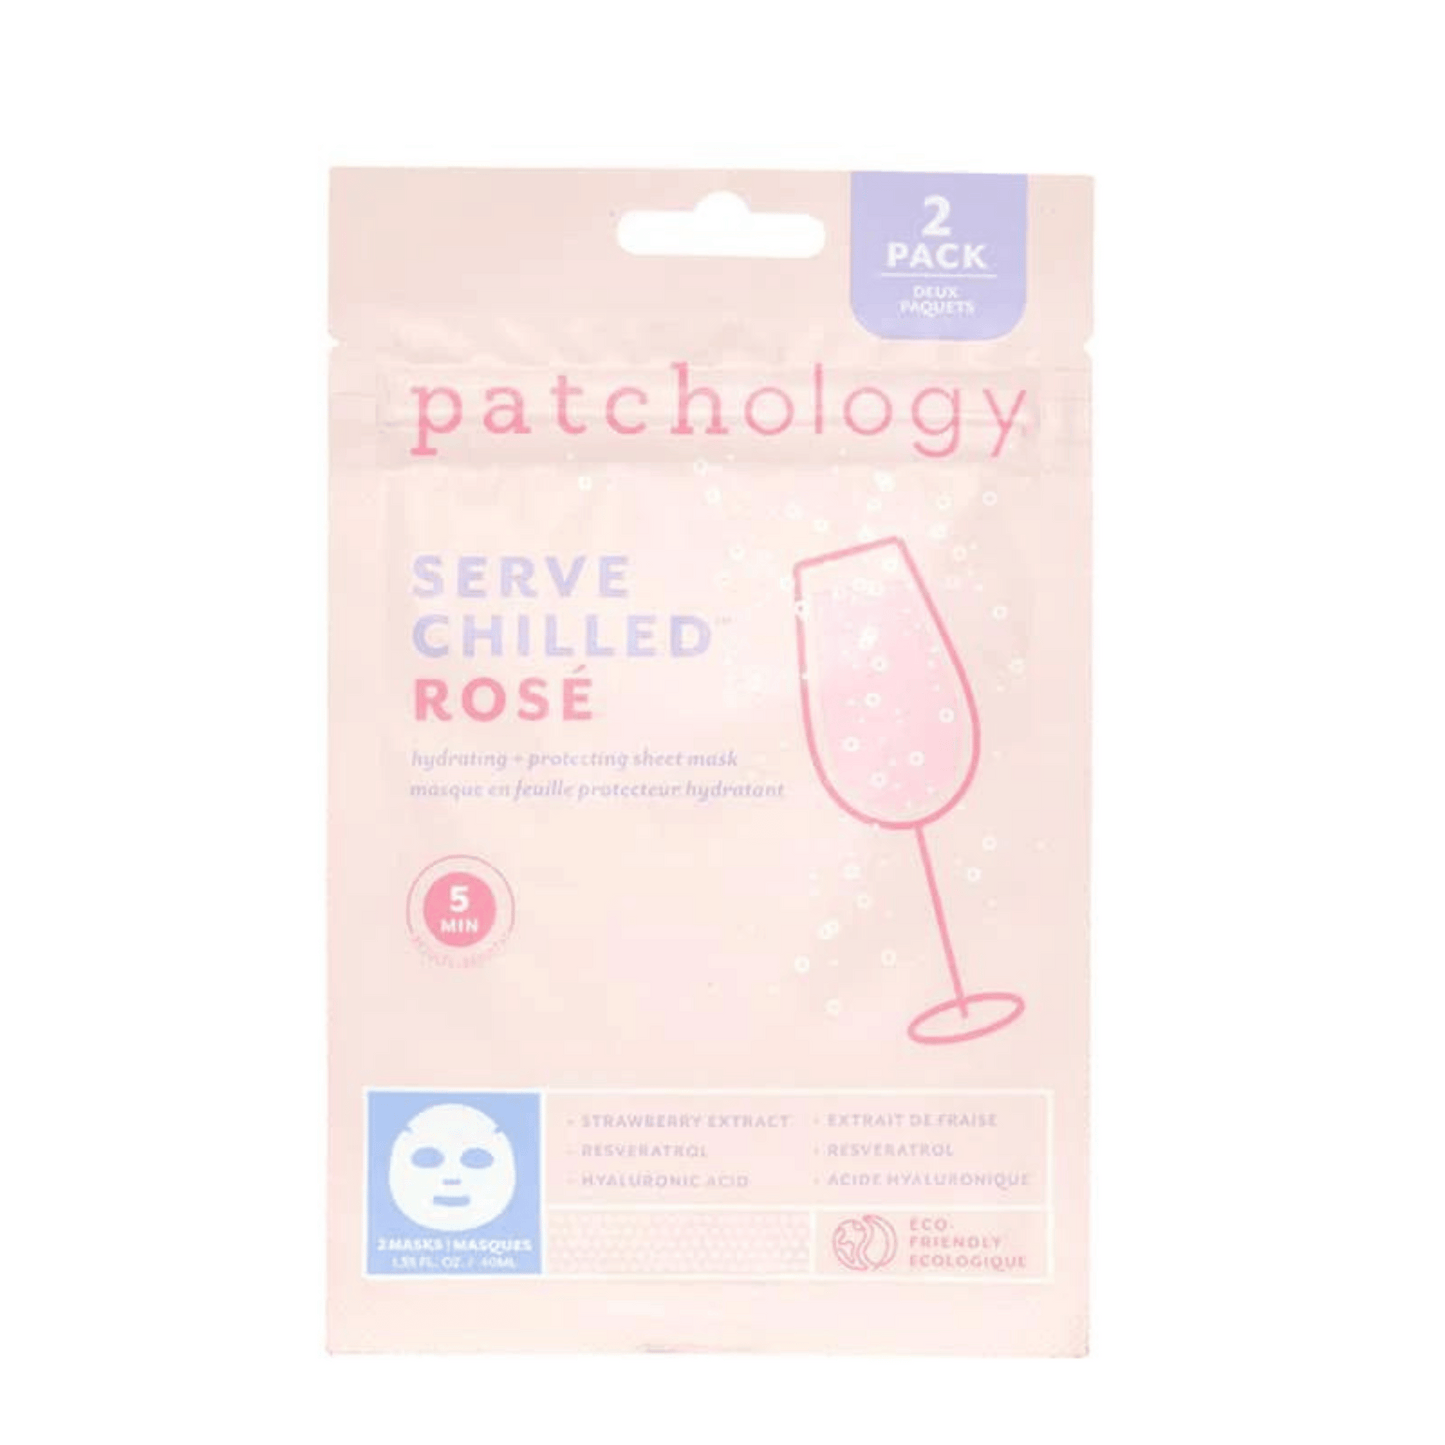 Primary Image of Served Chilled Rose Face Mask